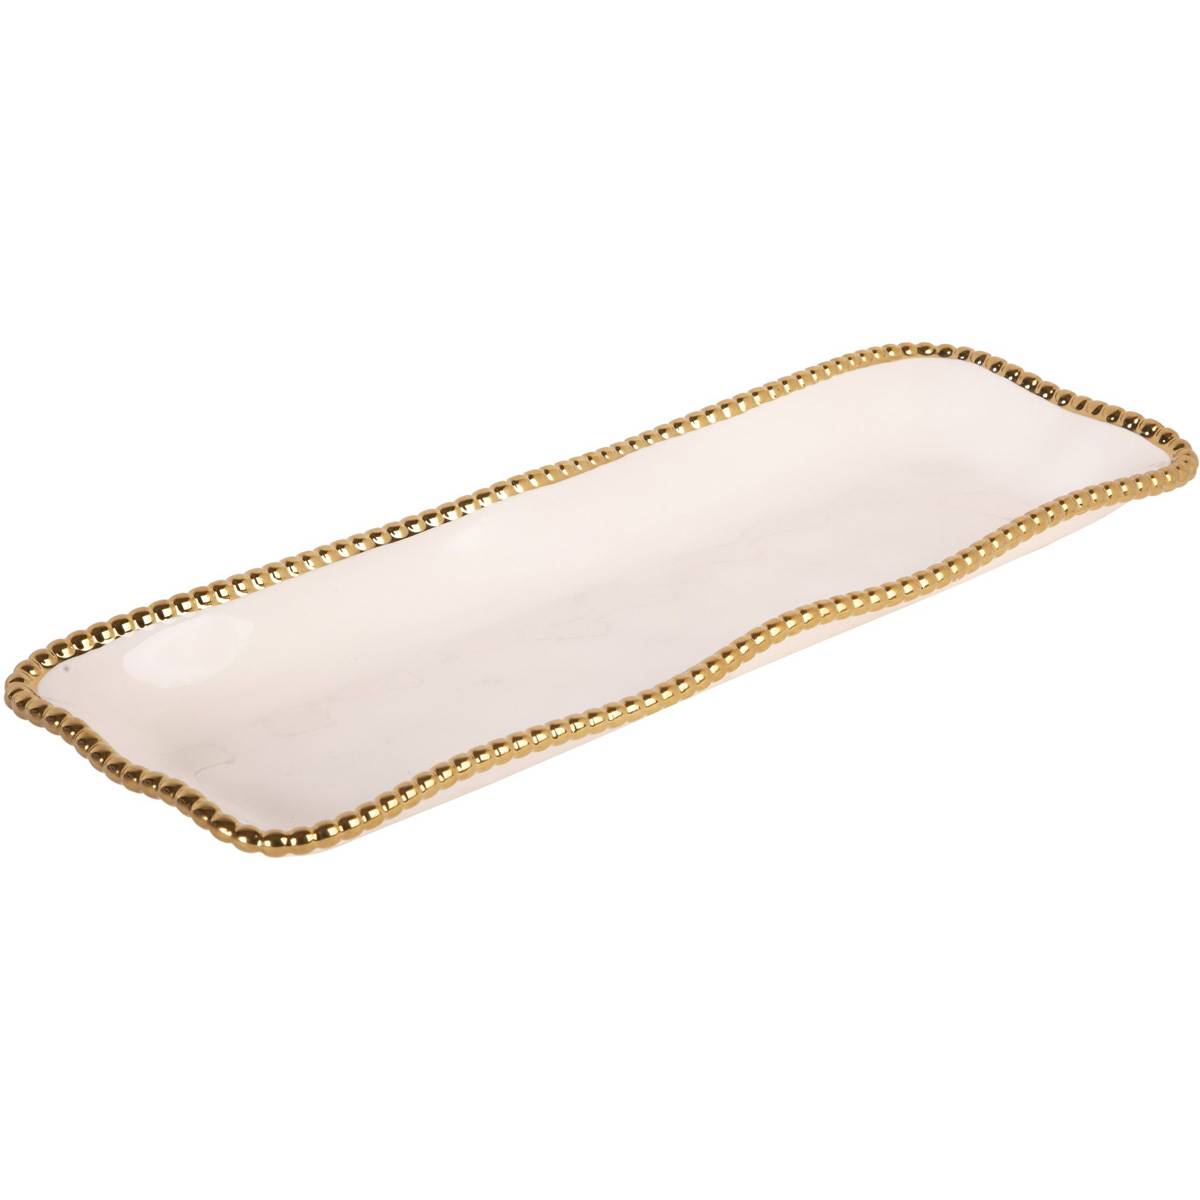 Home Essentials 18x8 White Rectangle Gold Edge Serving Tray